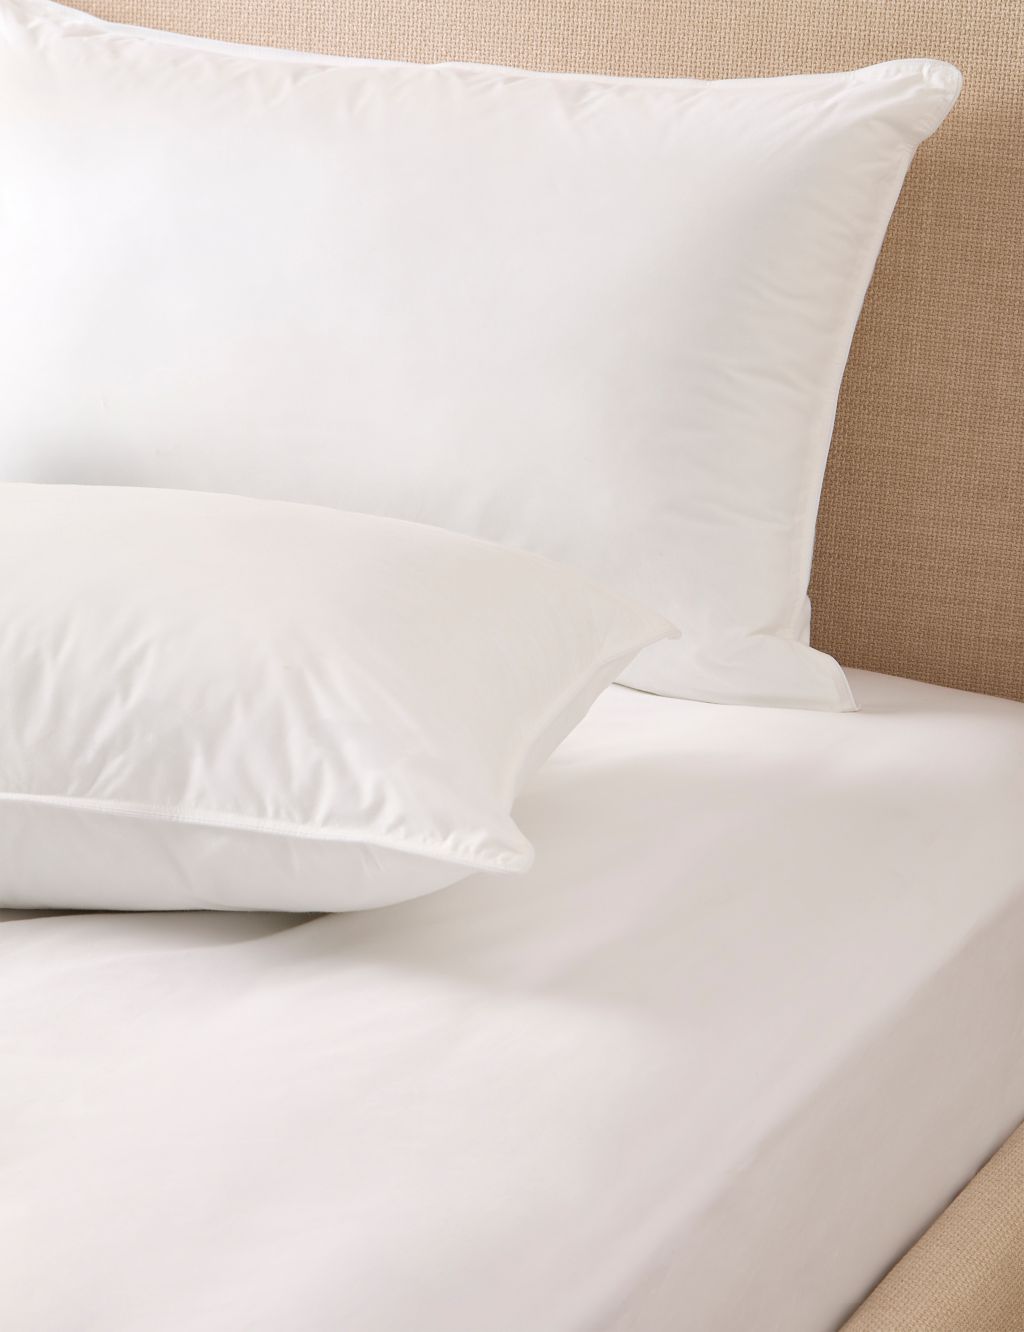 2 Pack Supremely Washable Firm Pillows